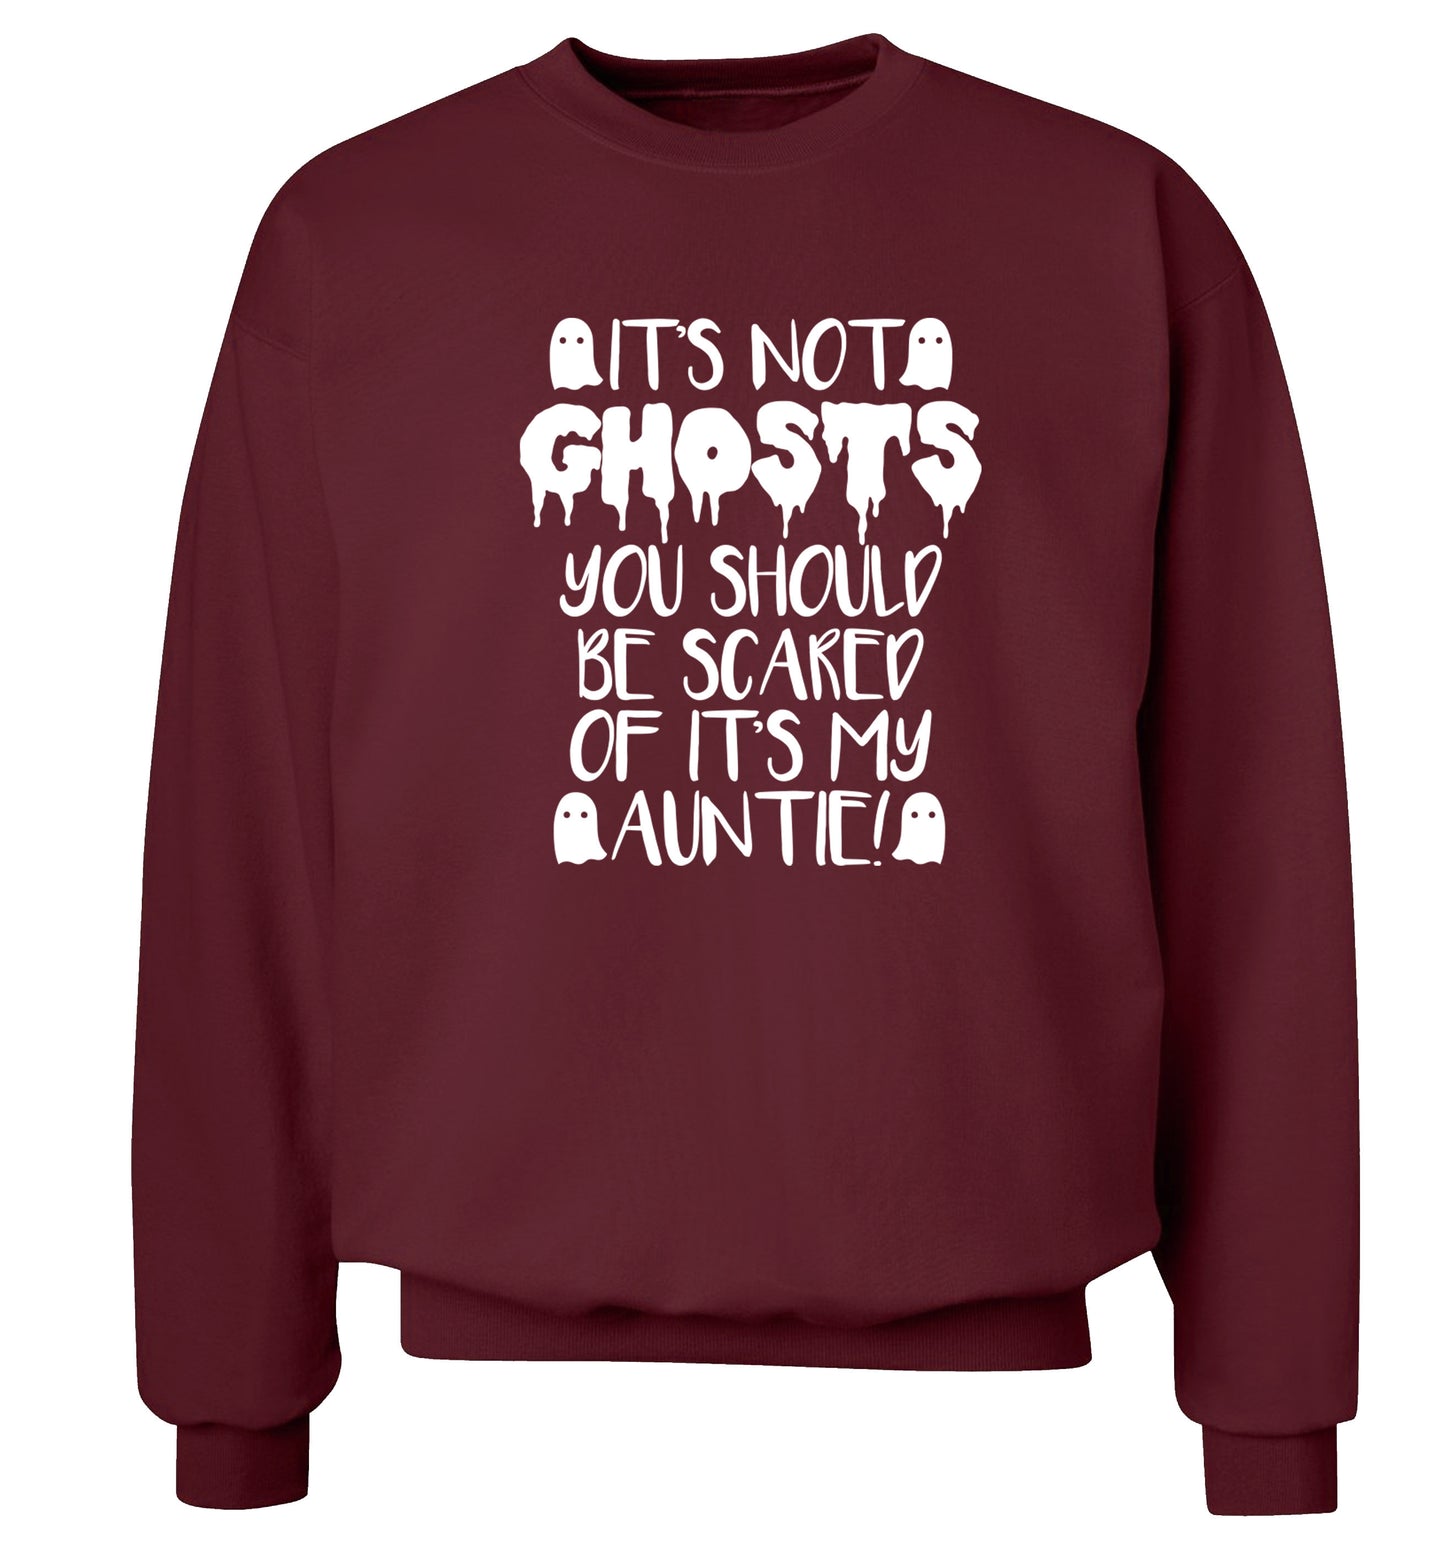 It's not ghosts you should be scared of it's my auntie! Adult's unisex maroon Sweater 2XL